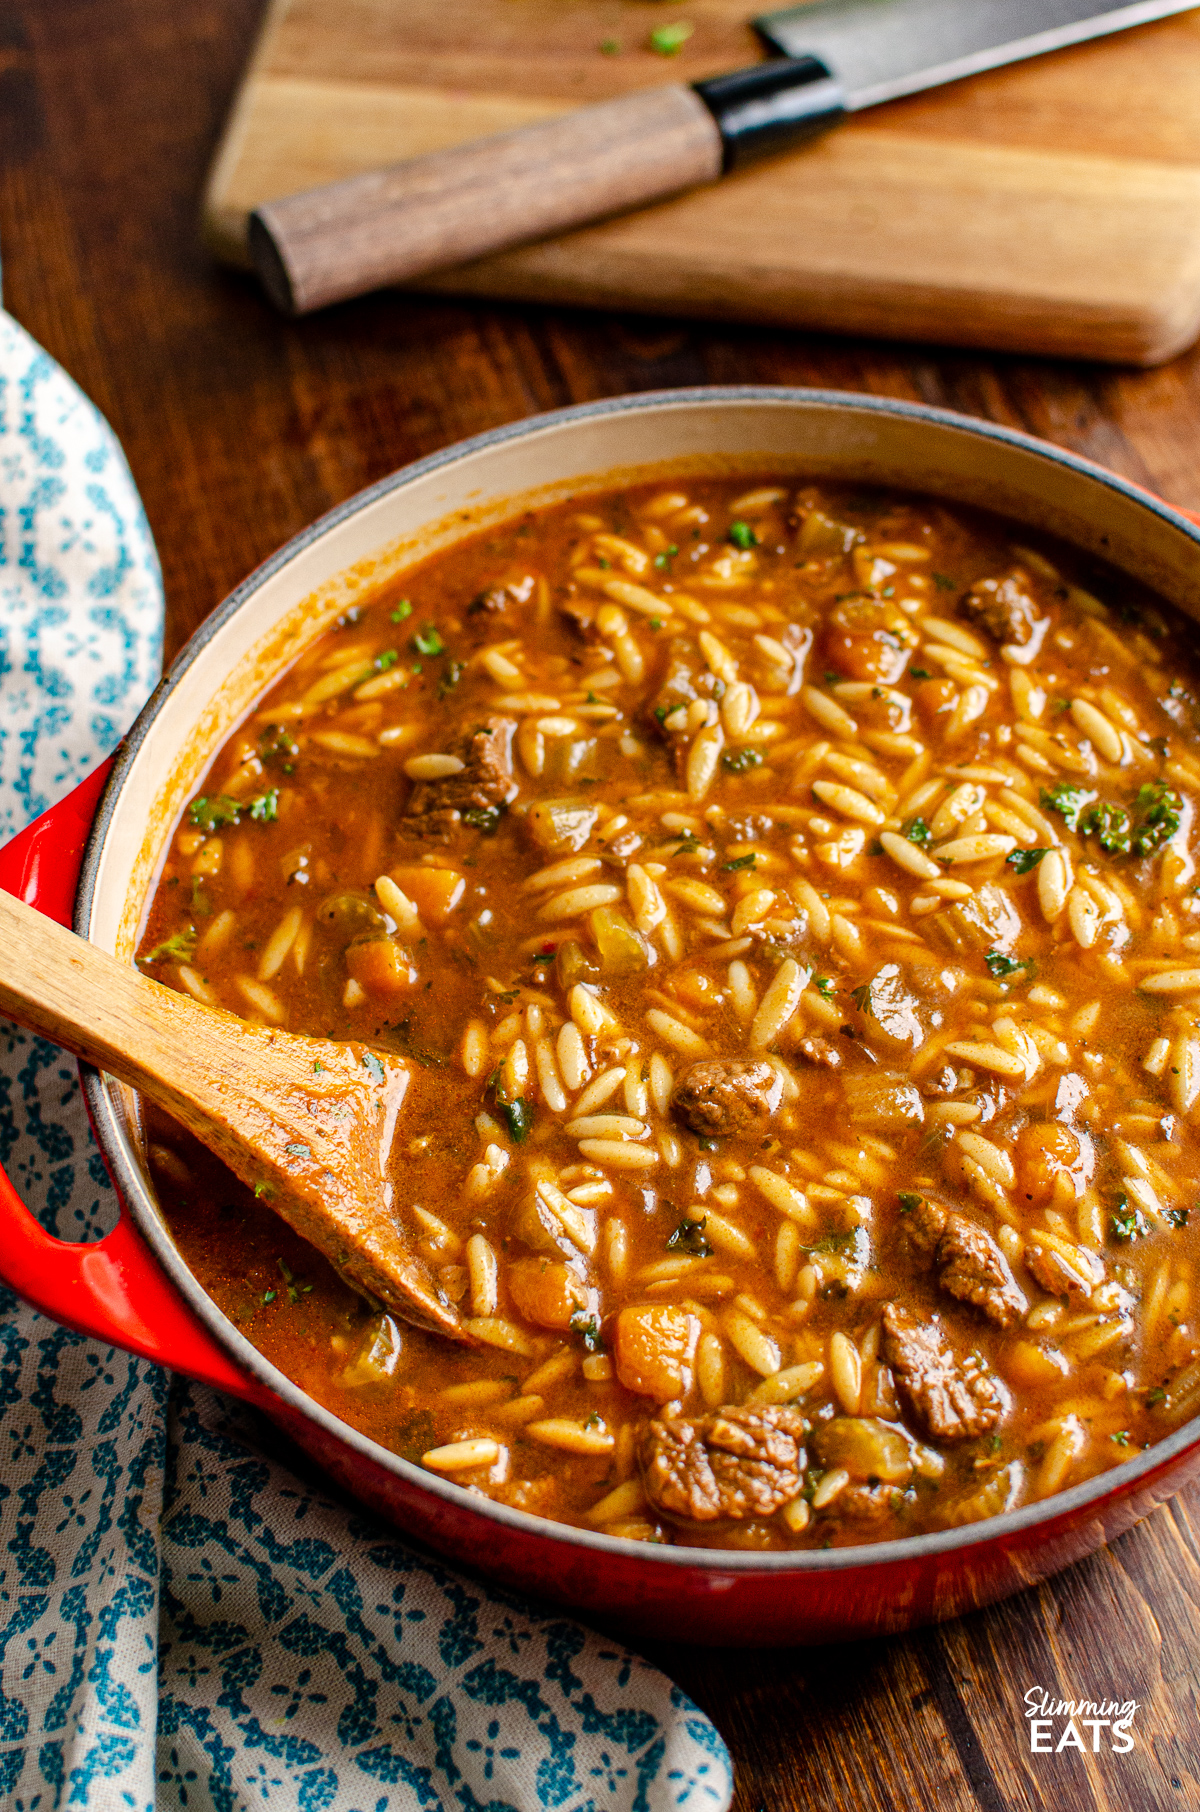 beef orzo stew in cerise cast iron pot with wooden spoon